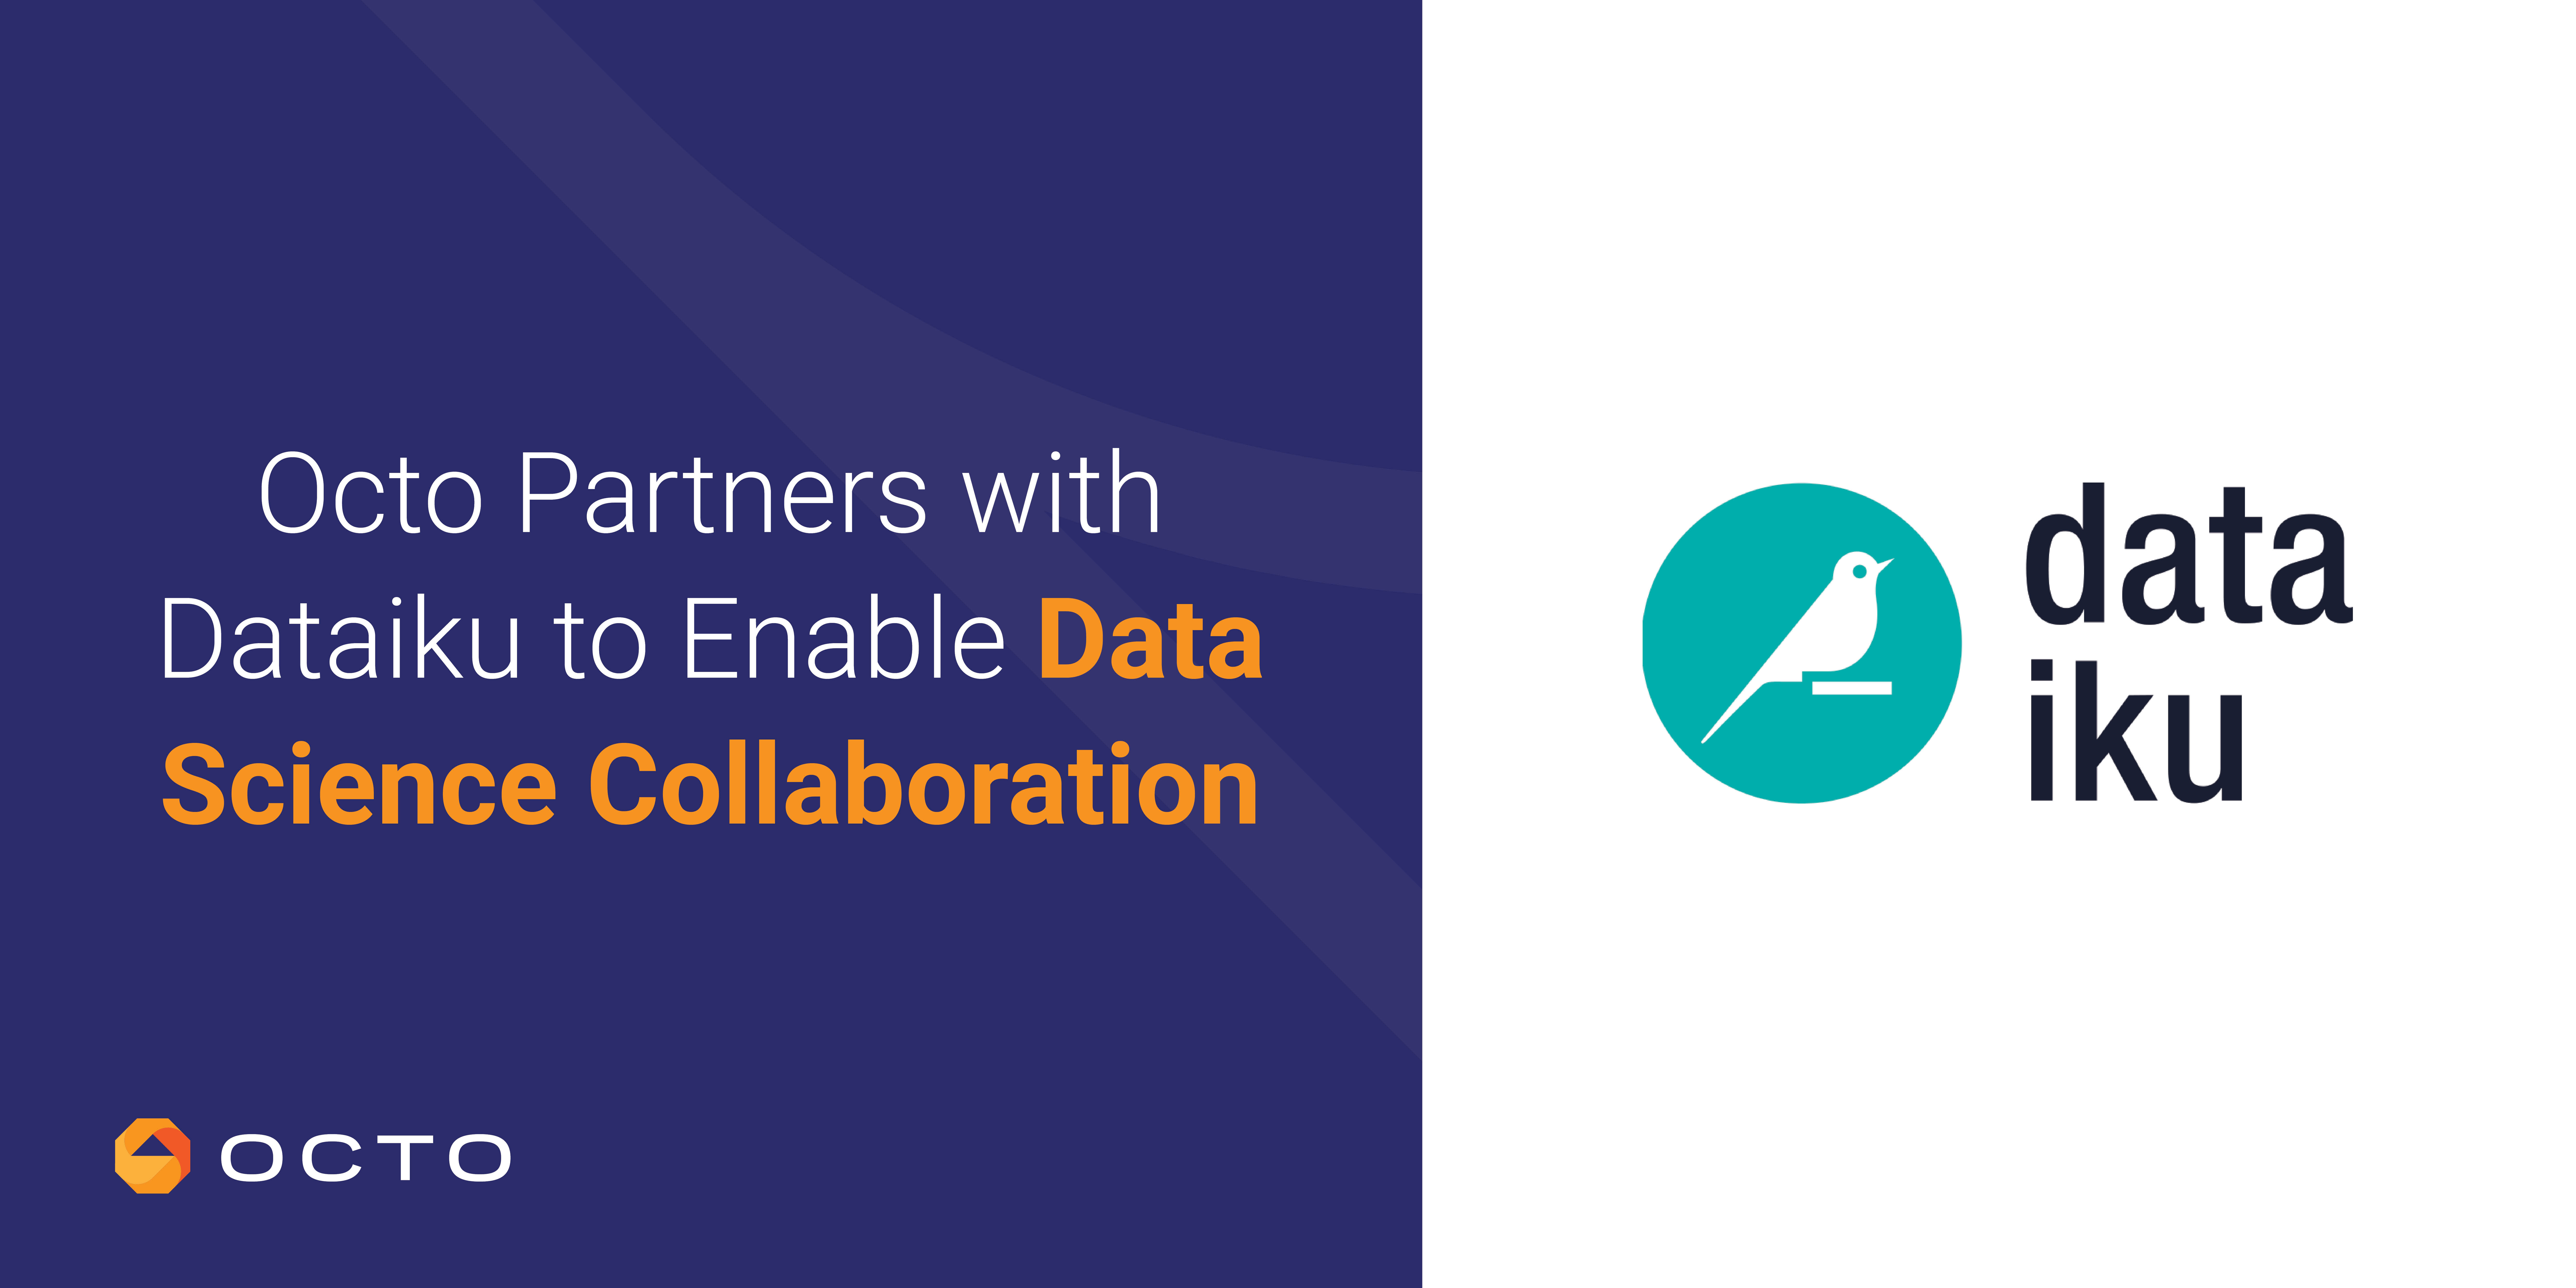 Octo Partners with Dataiku to Enable Data Science Collaboration